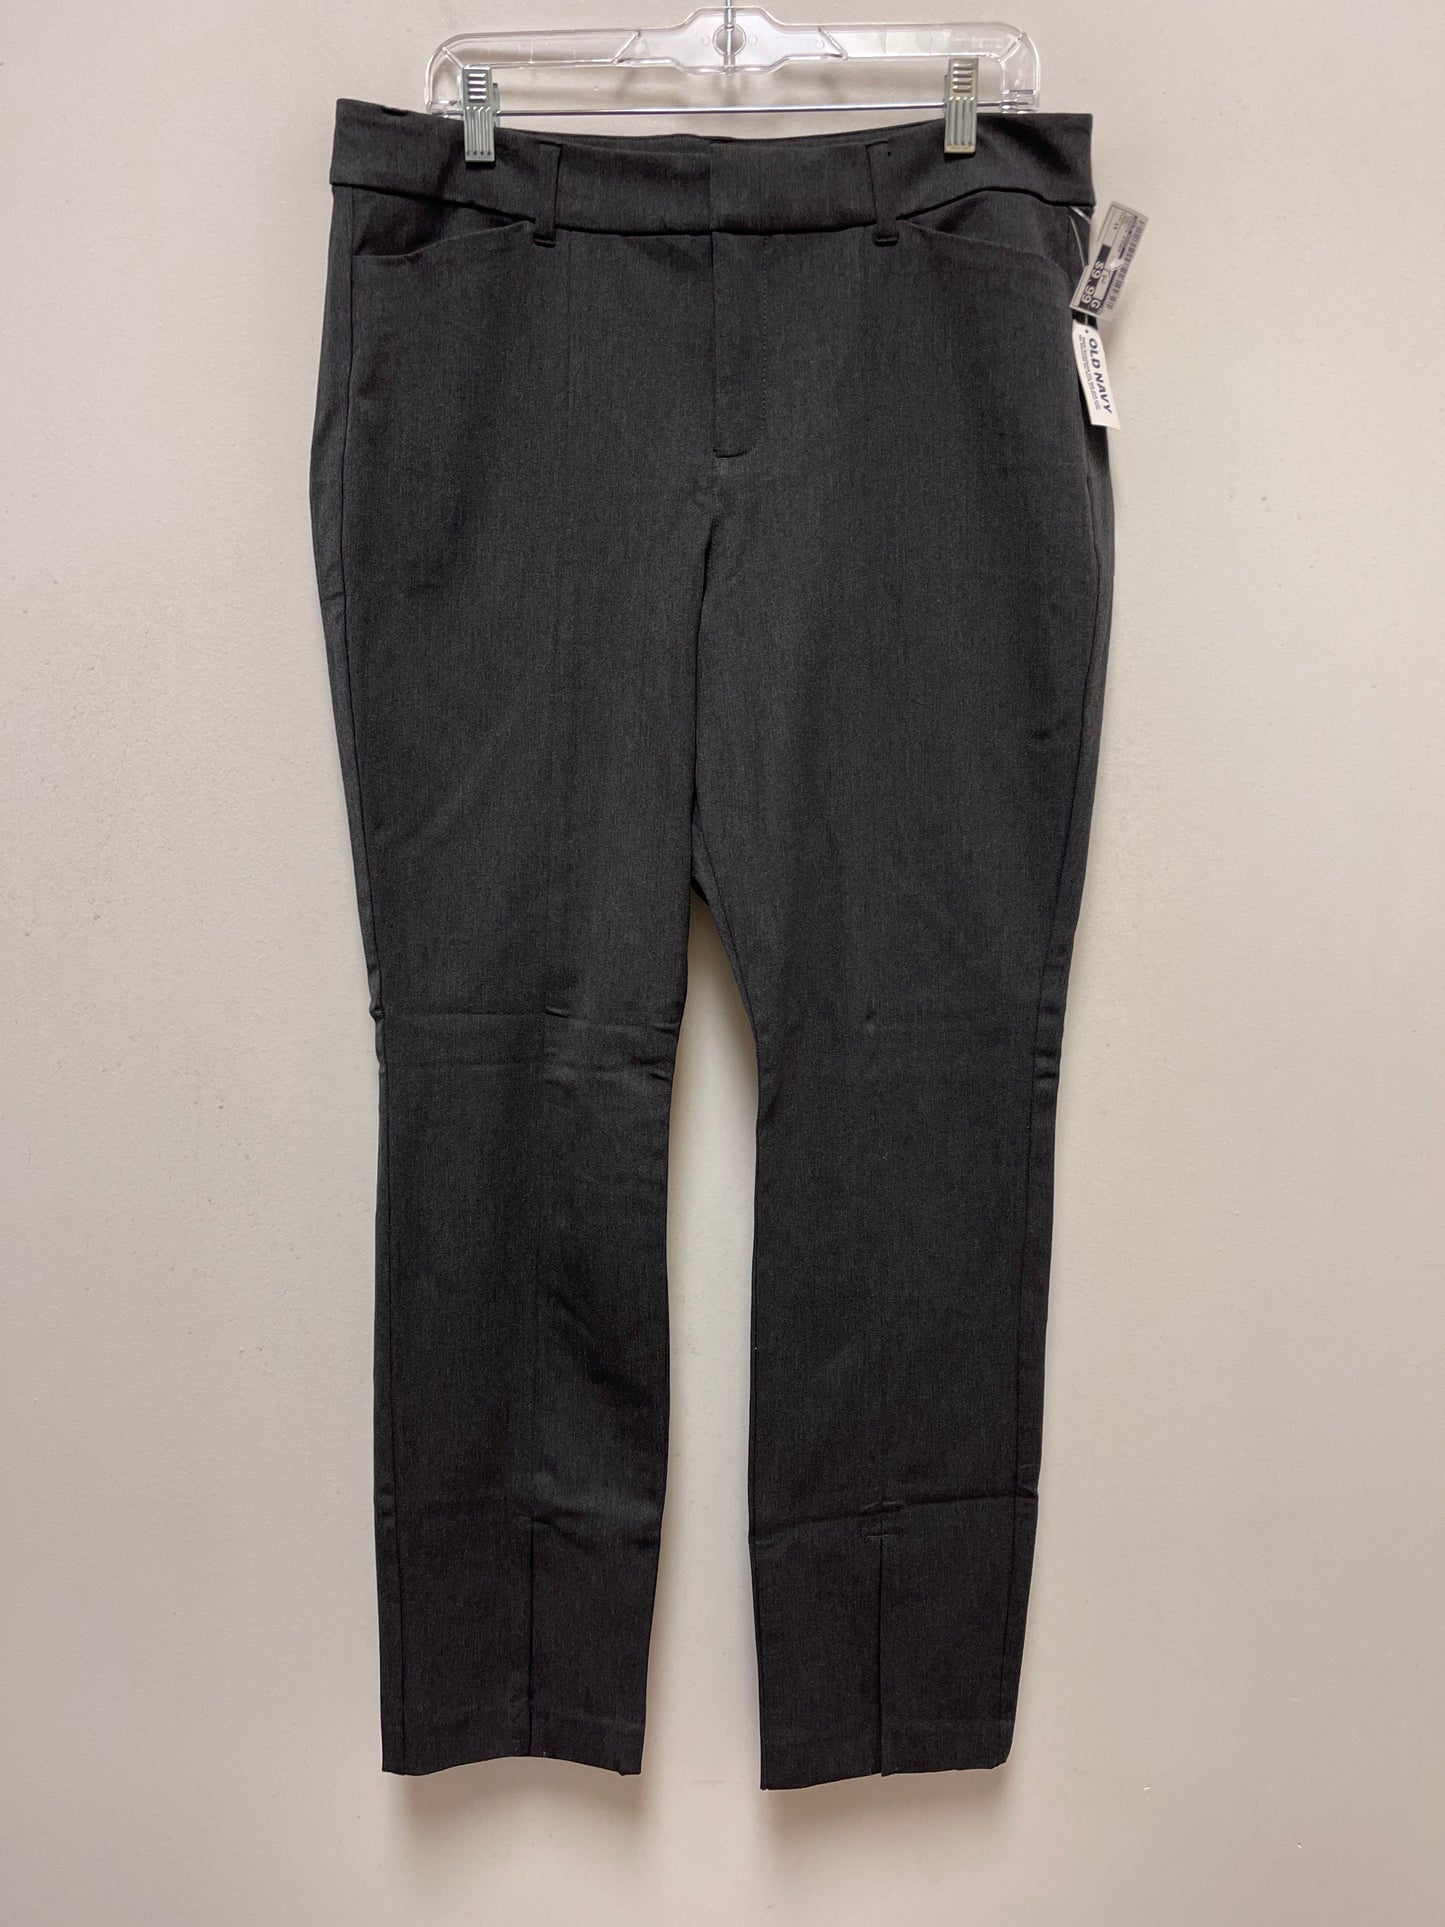 Grey Pants Other Old Navy, Size 14